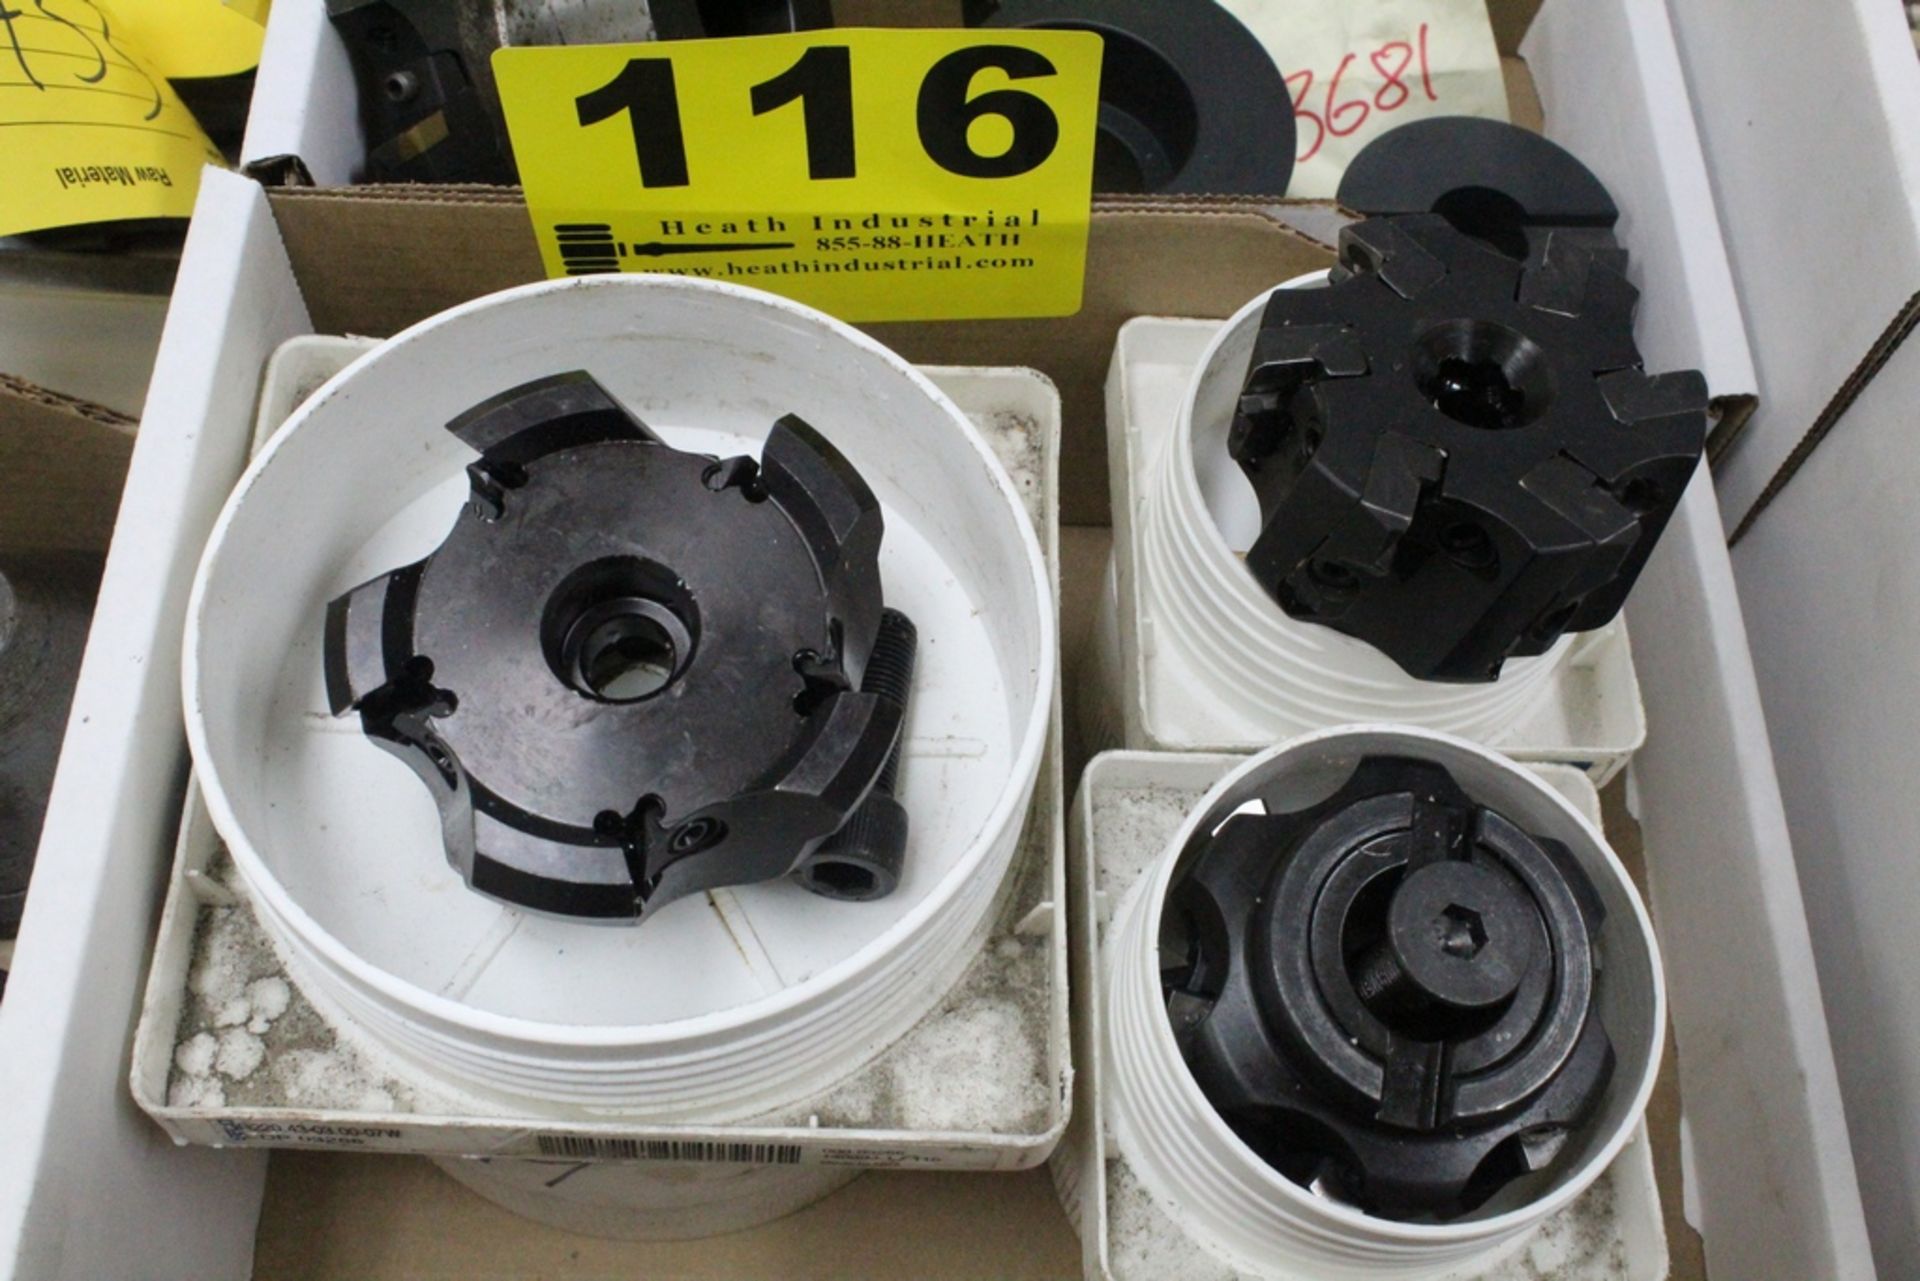 SECO INSERT TYPE FACE MILLING CUTTERS (APPEAR NEW)